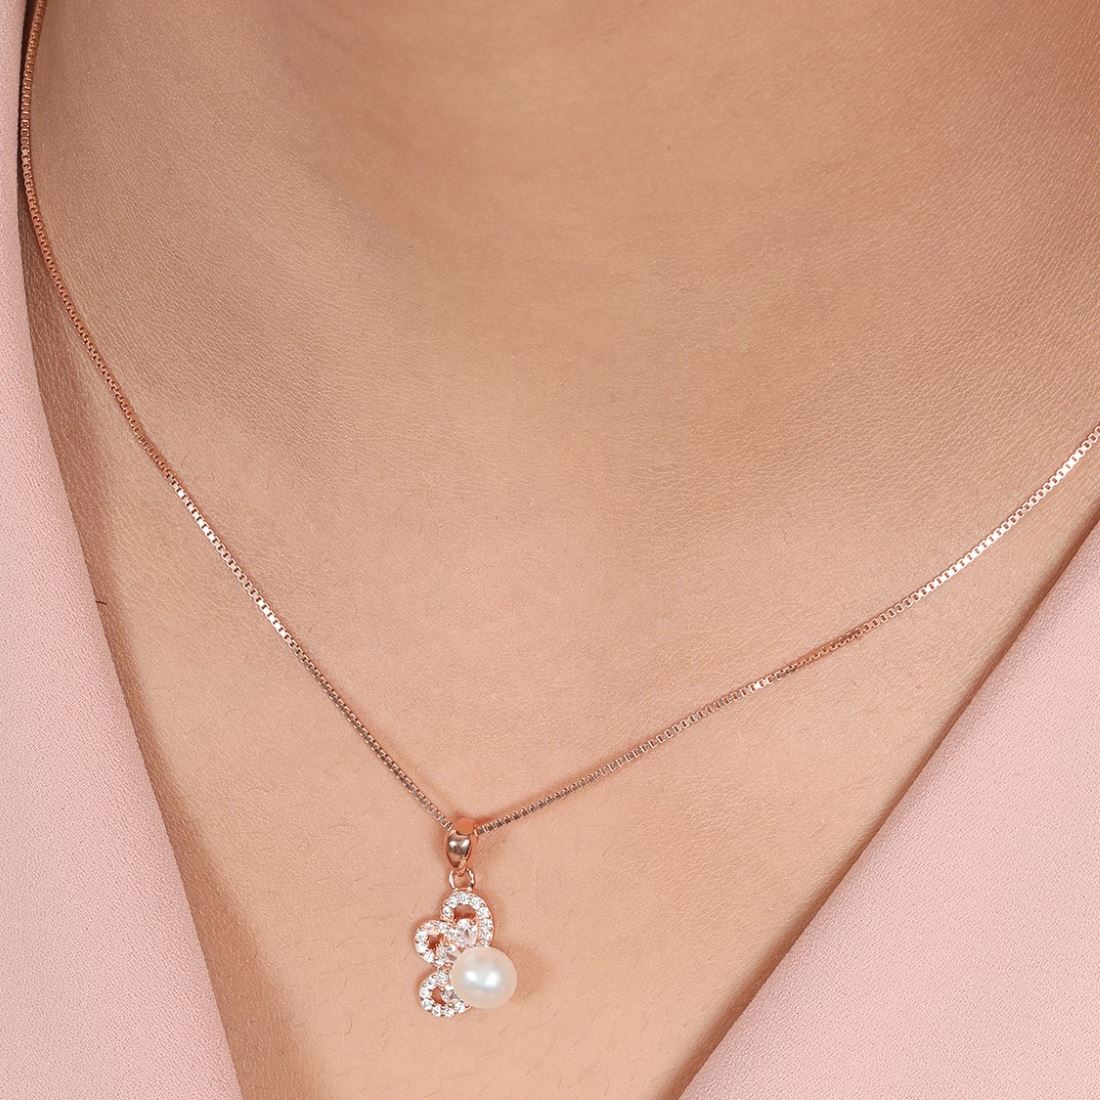 Petals in Bloom Pearl-CZ Rose Gold-Plated Half Flower Sterling Silver Pendant with Chain